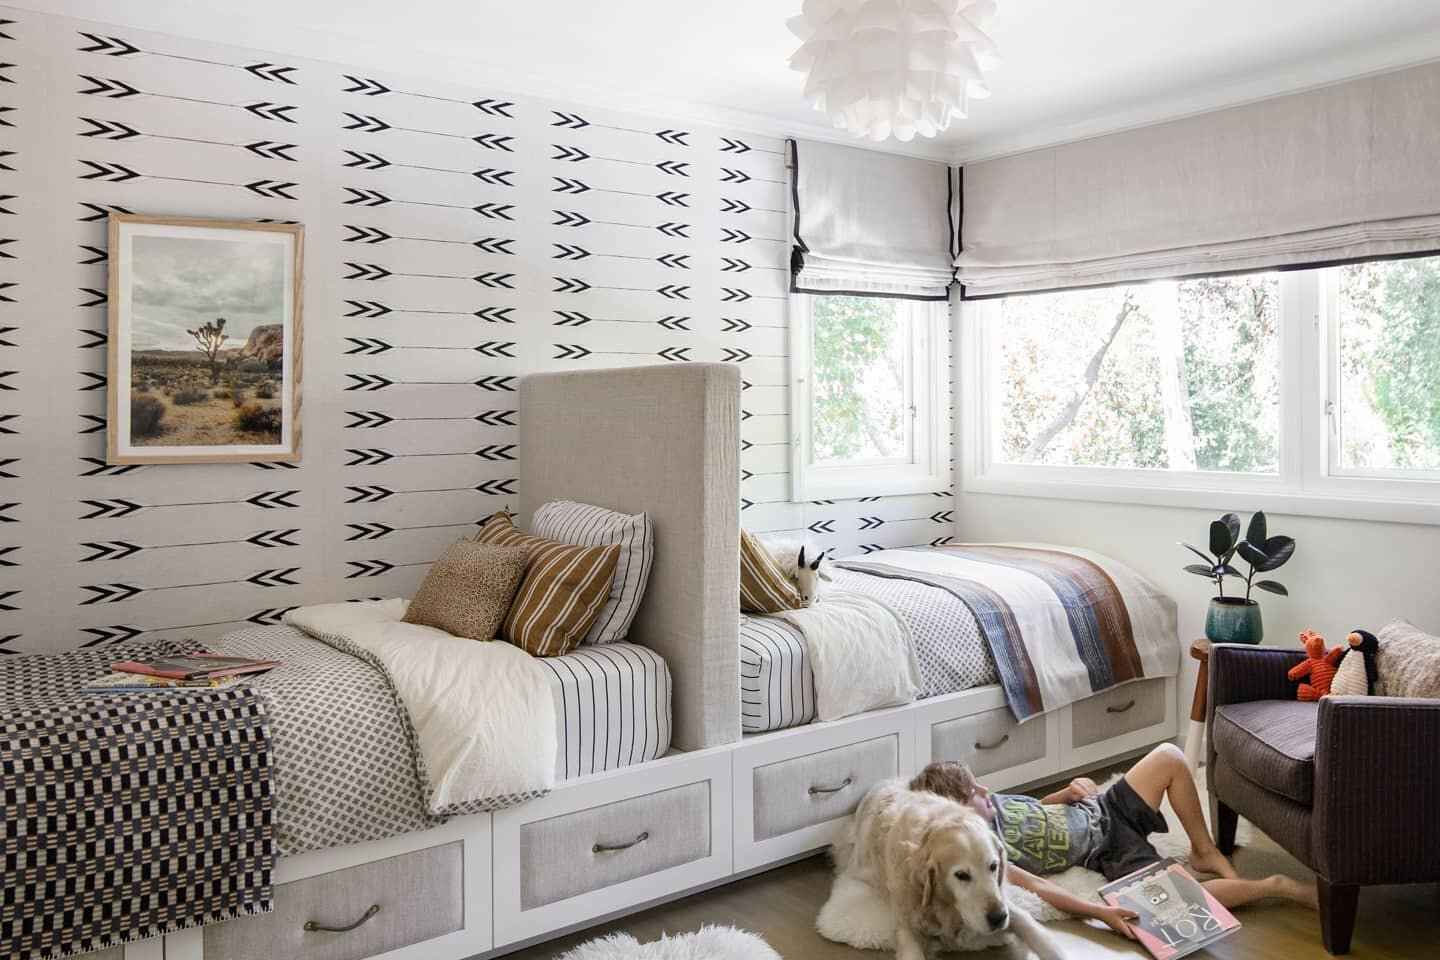 Our biggest tip for designing a kids room: storage!

Having a place to put everything away and out of sight is not only important for keeping mom and dad happy, it also helps your little ones learn to keep their room tidy. By having a space for every